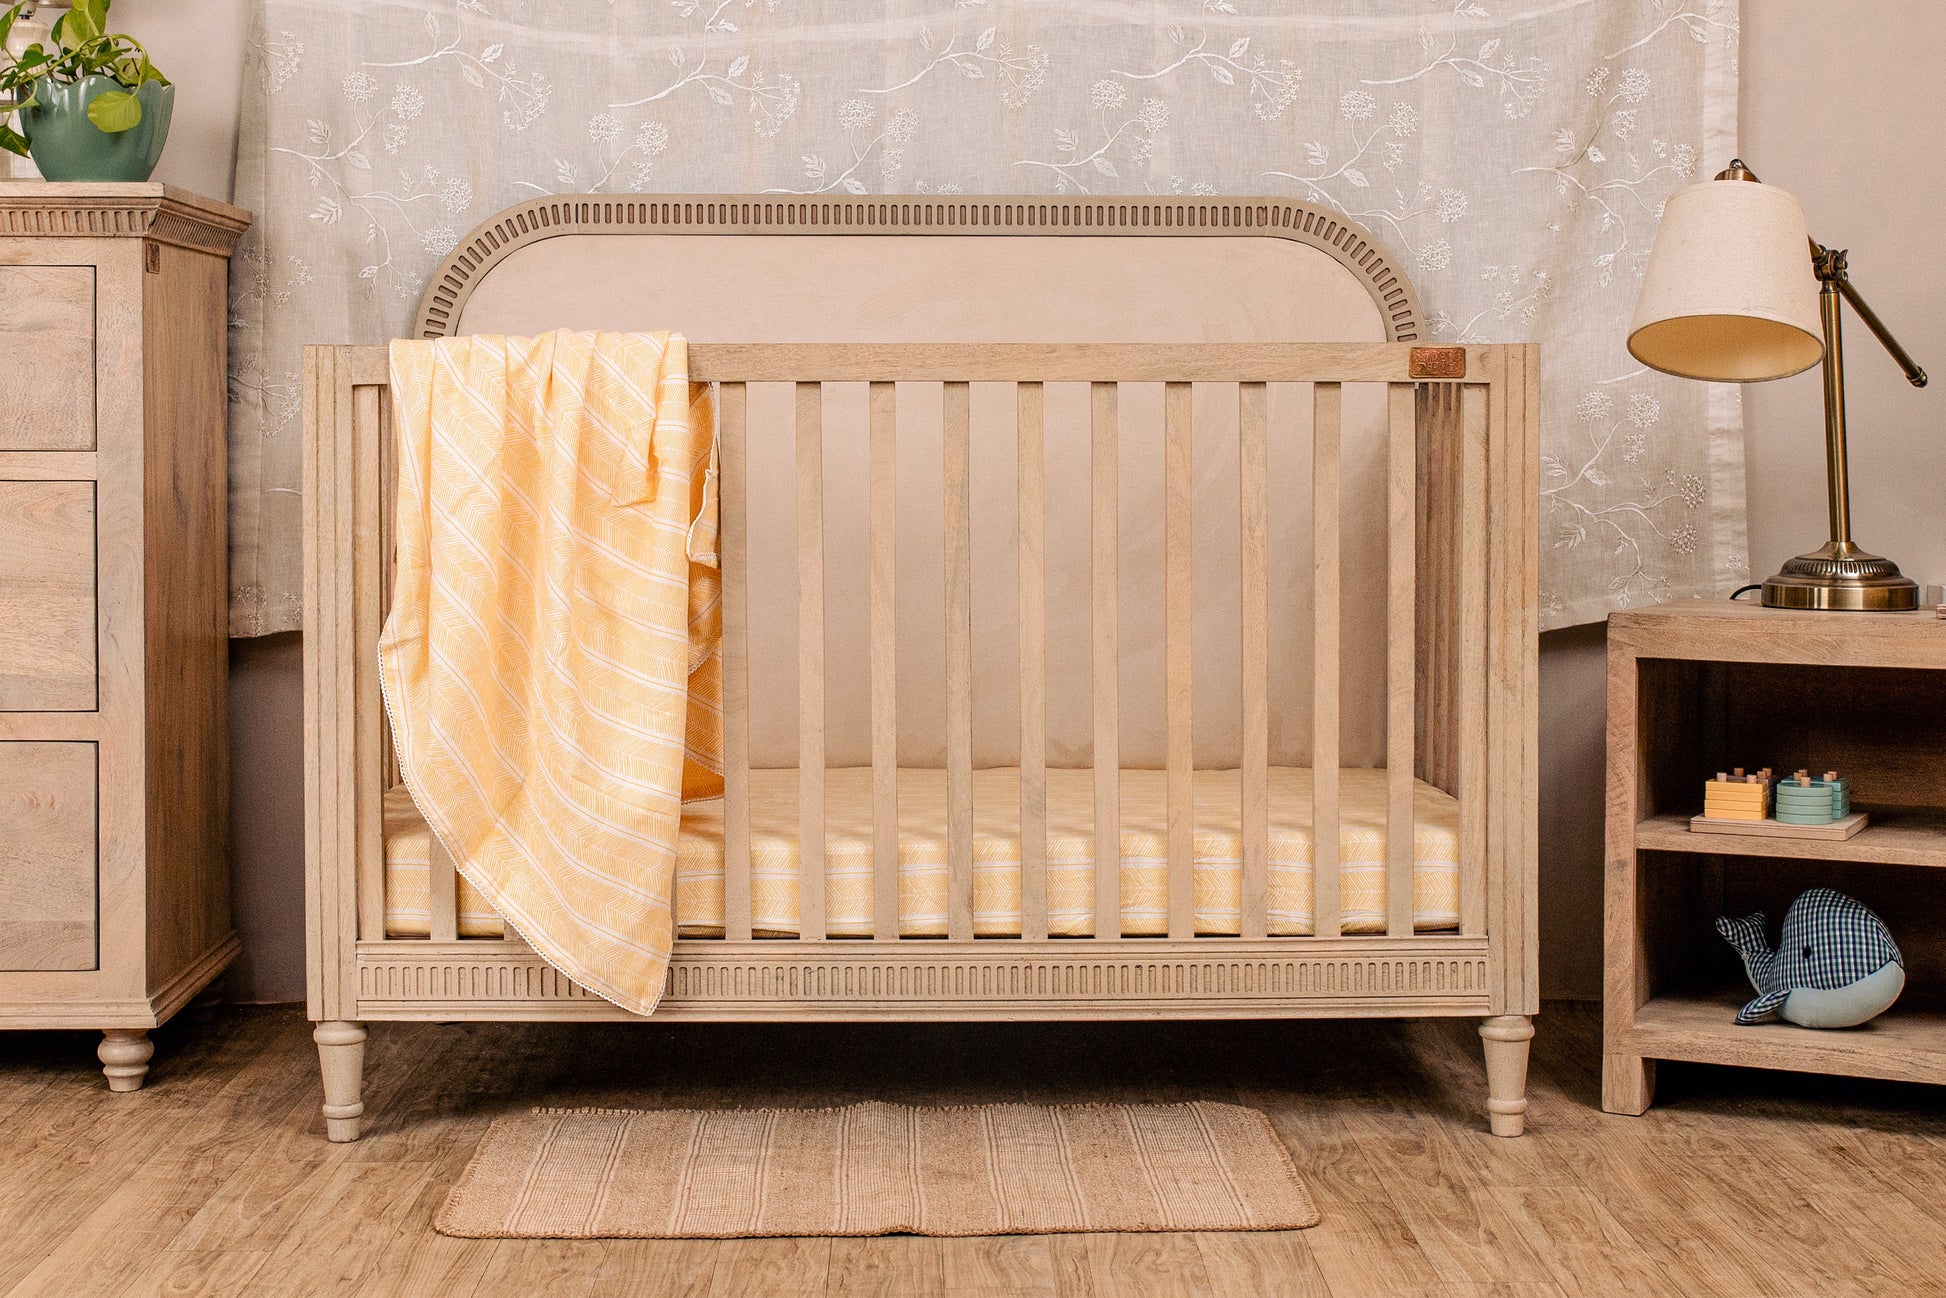 Buy Wooden Baby Cot With Headboard - Oat Finish Online - SkilloToys.com